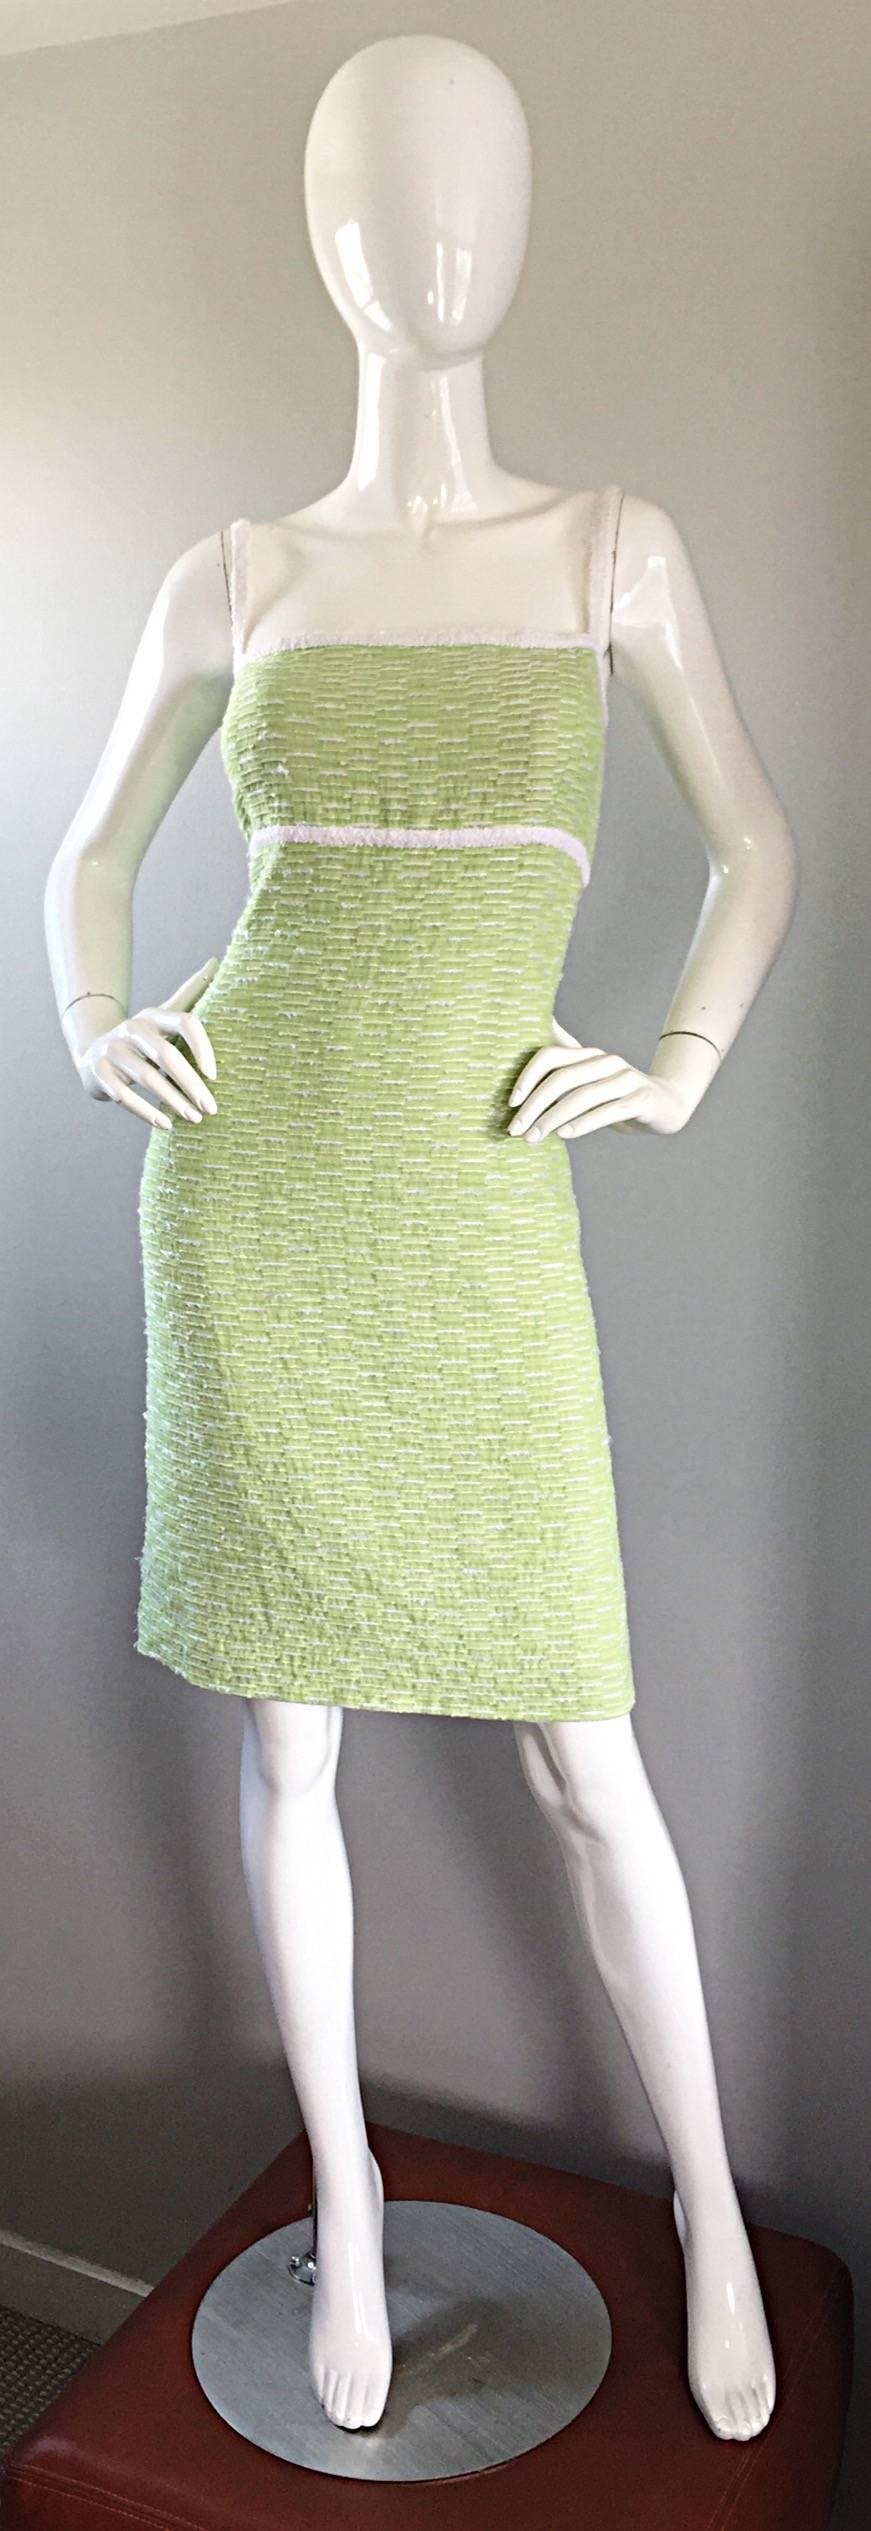 Incredibly flattering vintage late 90s (never worn) ESCADA pale green boucle dress! Marked Size 42, which translates to a US Size 12 - 14. Green and white boucle, with white trimmed bodice and shoulder straps. Looks amazing on, and was created with